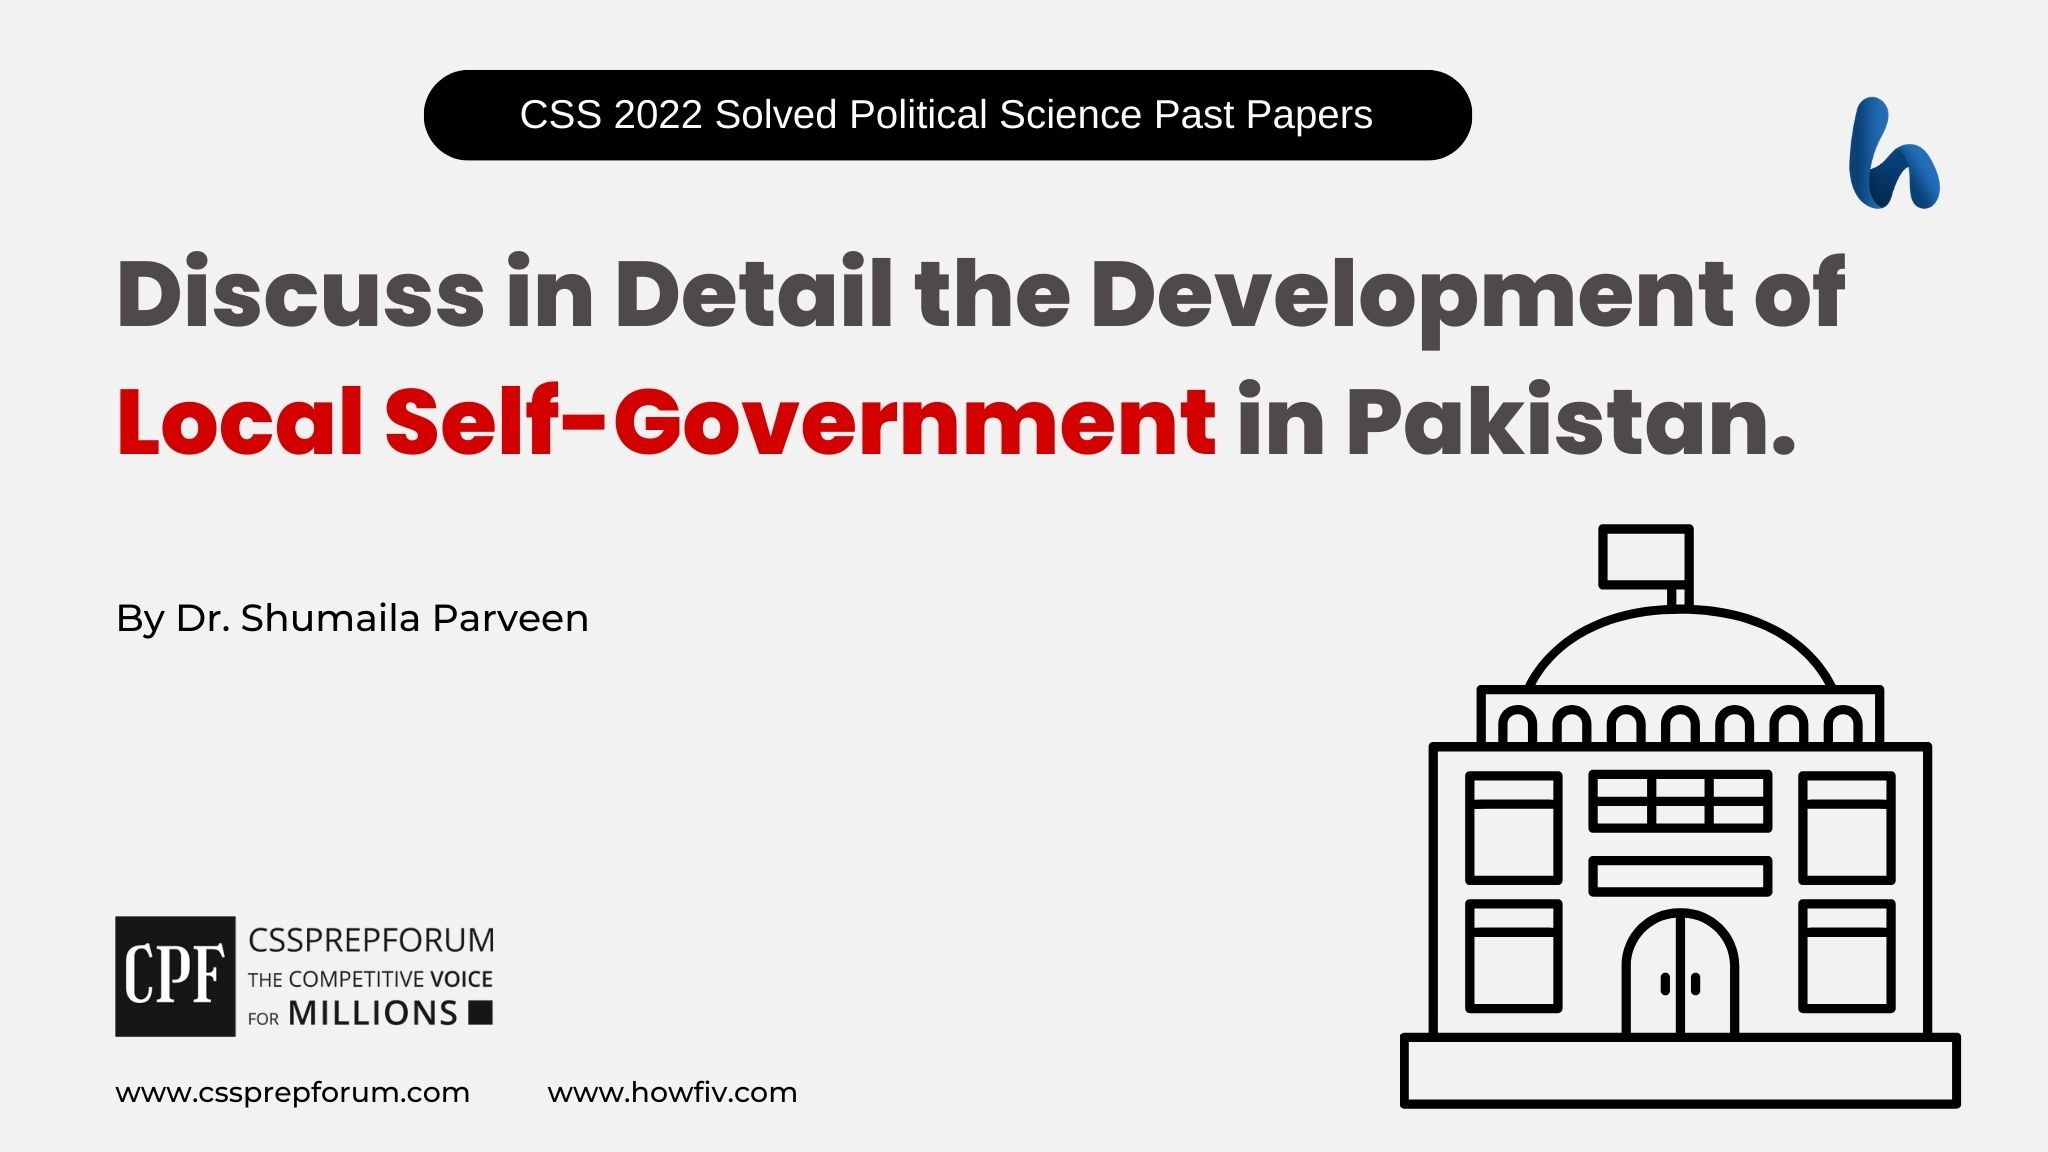 The Development of Local Self-Government in Pakistan by Dr. Shumaila Parveen